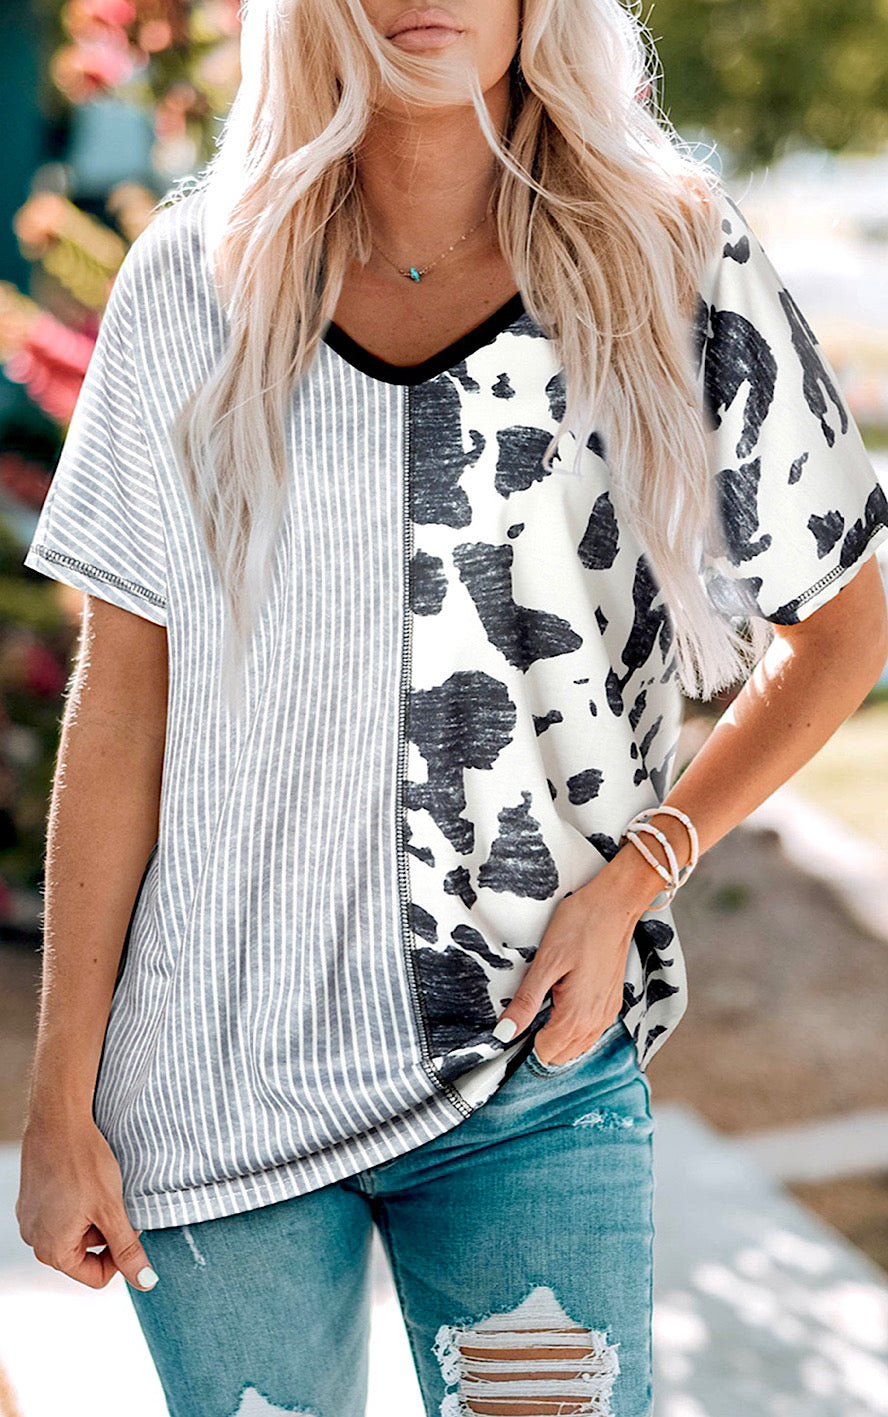 Showing Off Grey Striped Animal Print Top